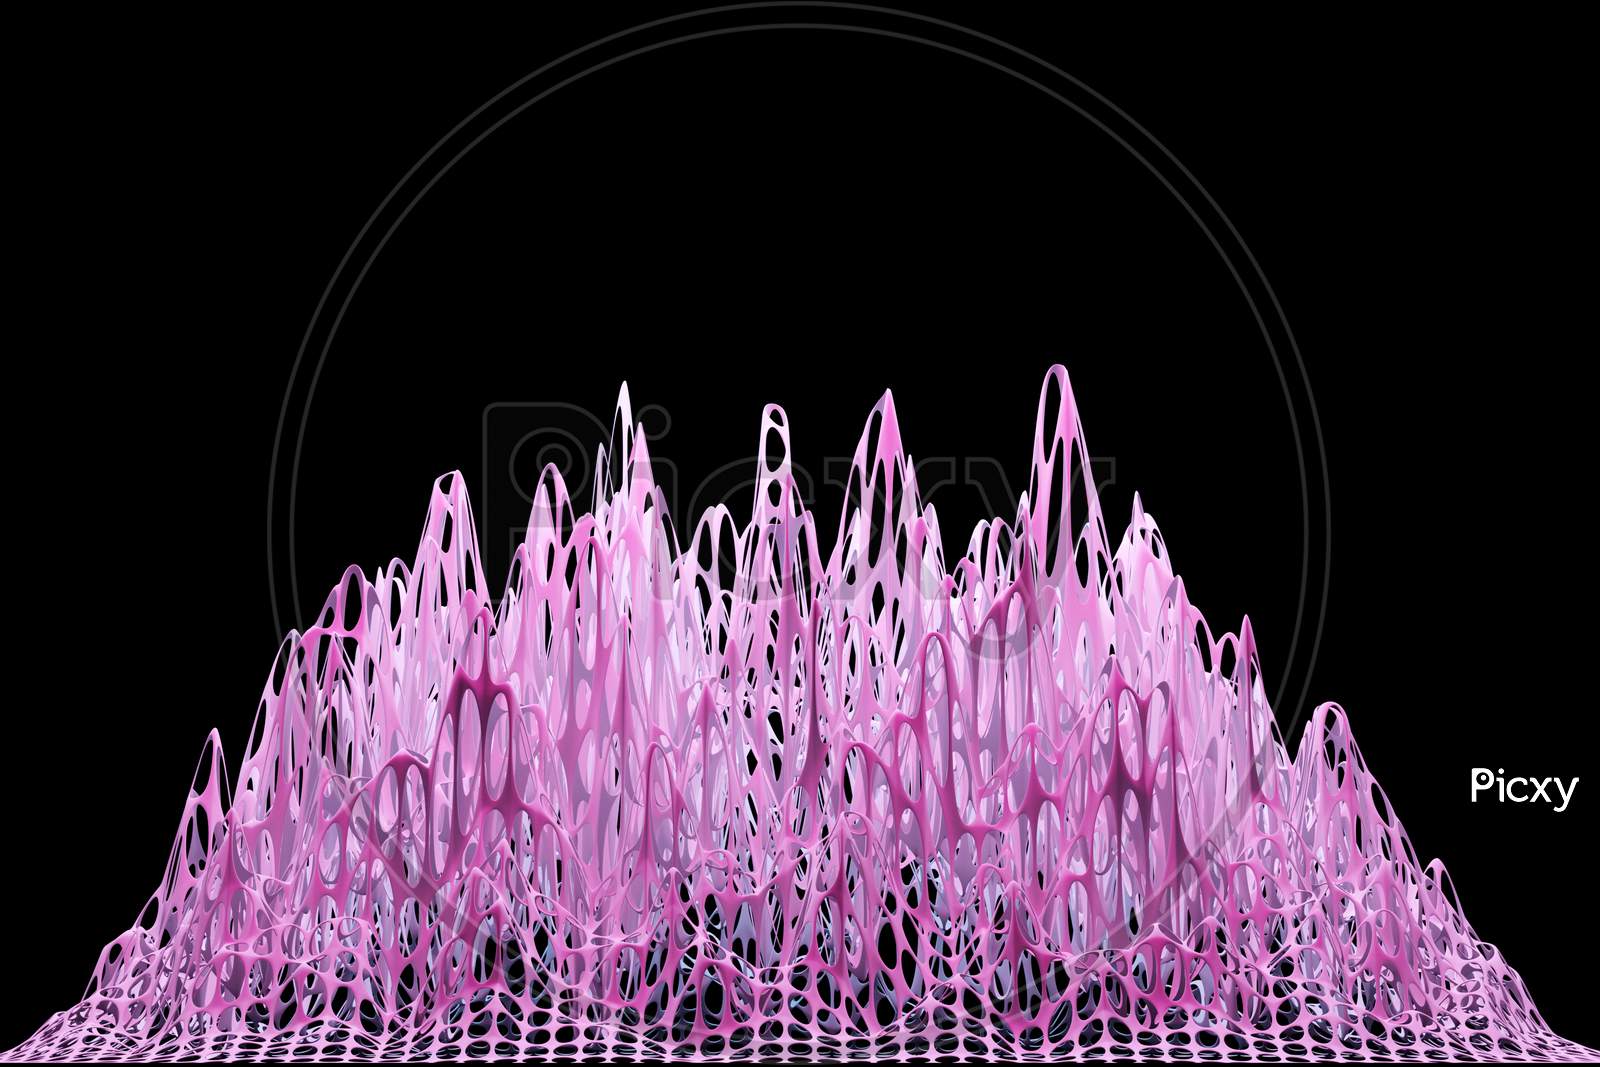 3D Illustration Of  Design Colorful Abstract Digital Sound Wave On A Black Background. Voice Recognition, Equalizer, Audio Recorder. Microphone Button With Sound Wave. Symbol Of Intelligent Technology